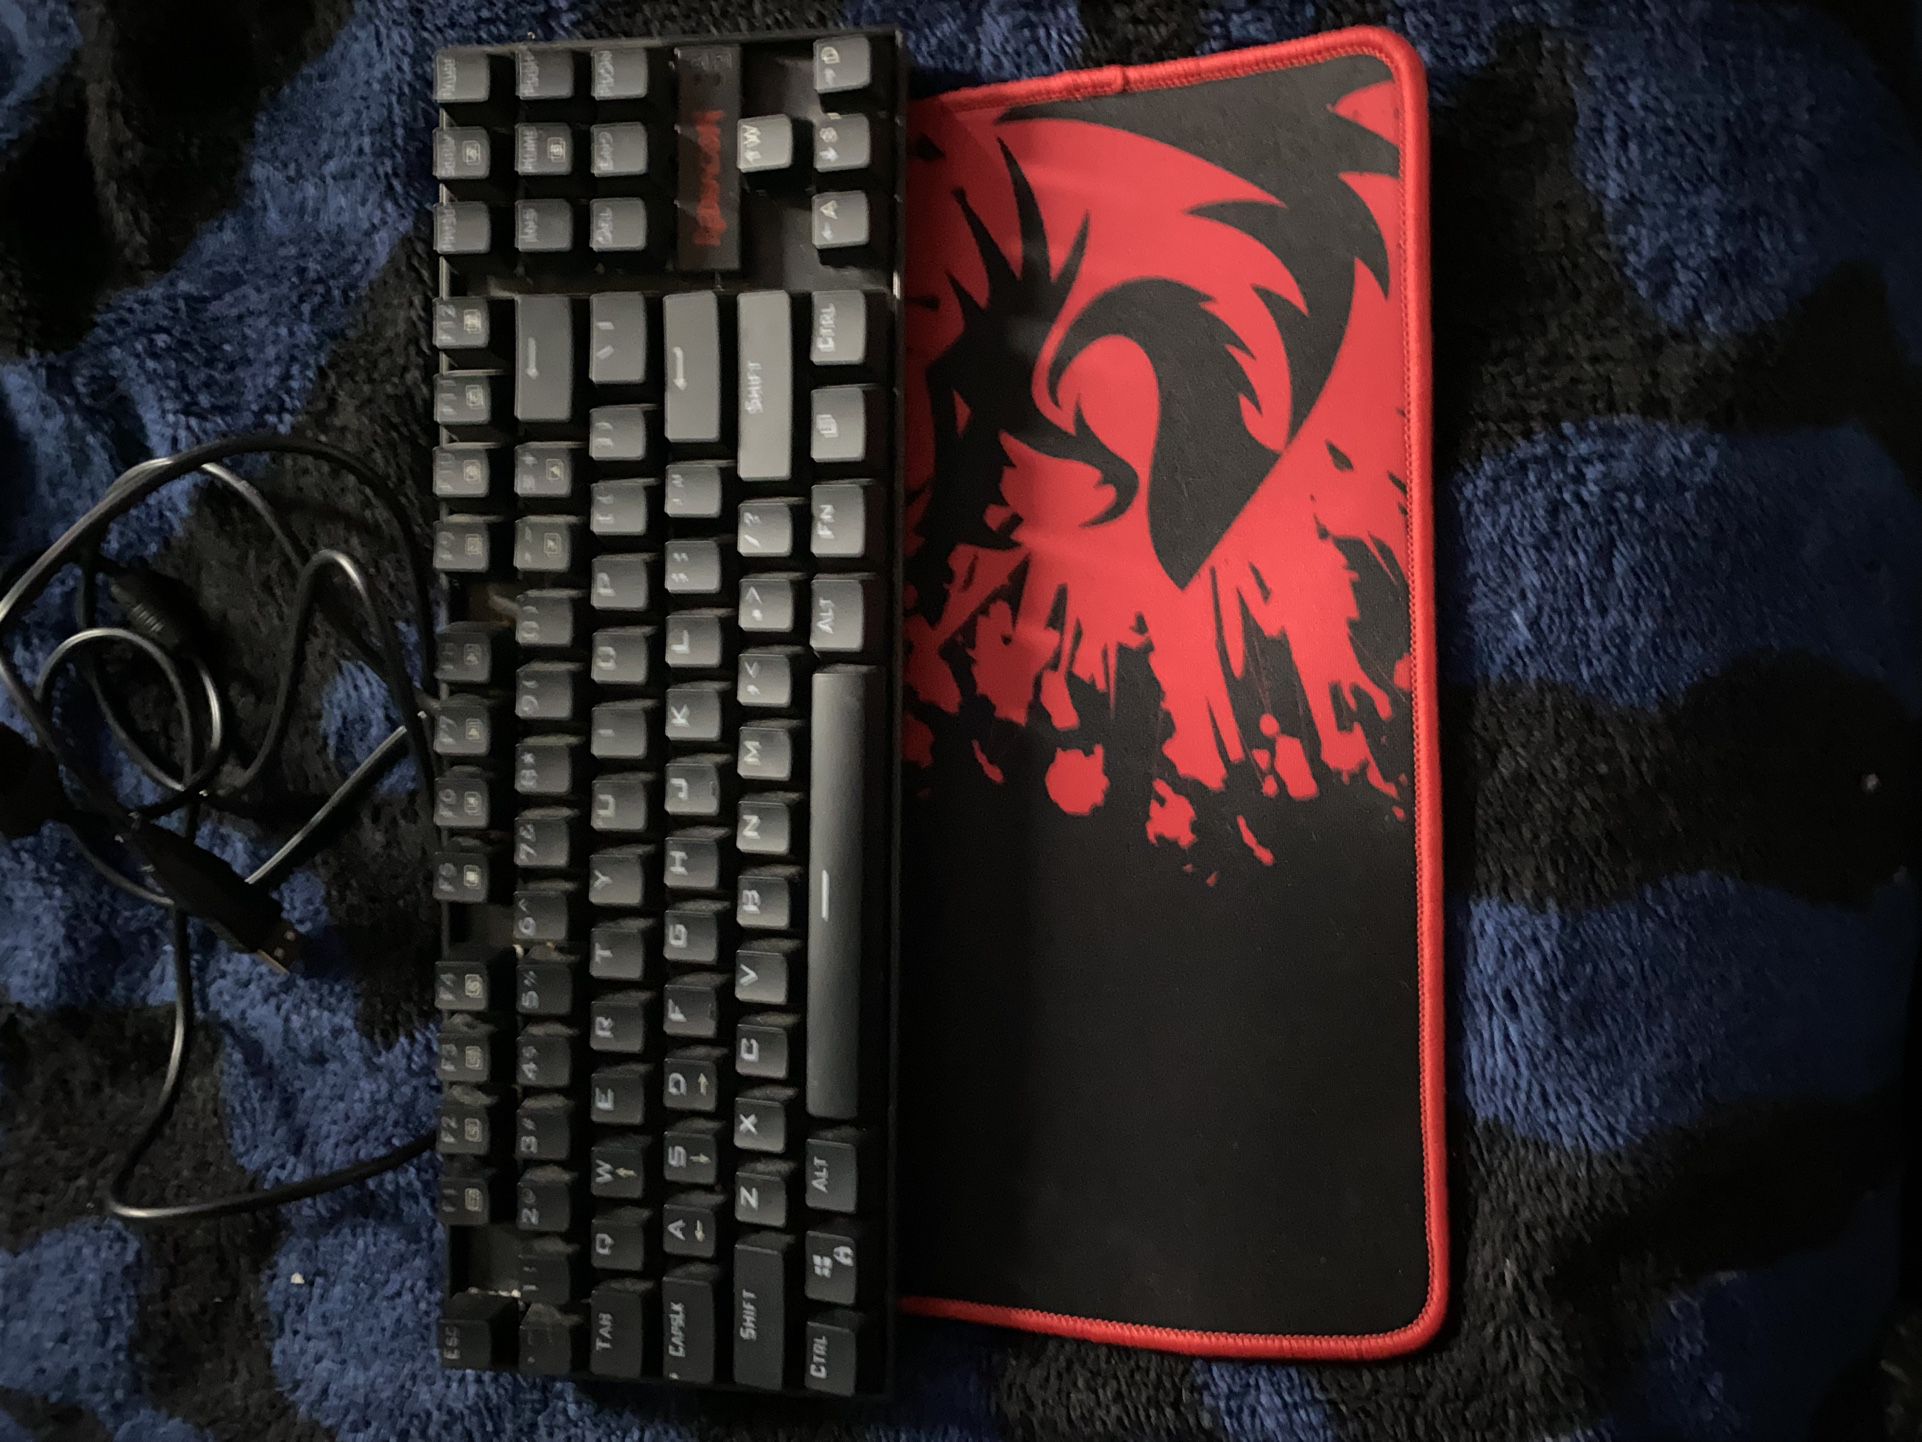 REDRAGON MECHANICAL KEYBOARD WITH MATCHING MOUSE PAD